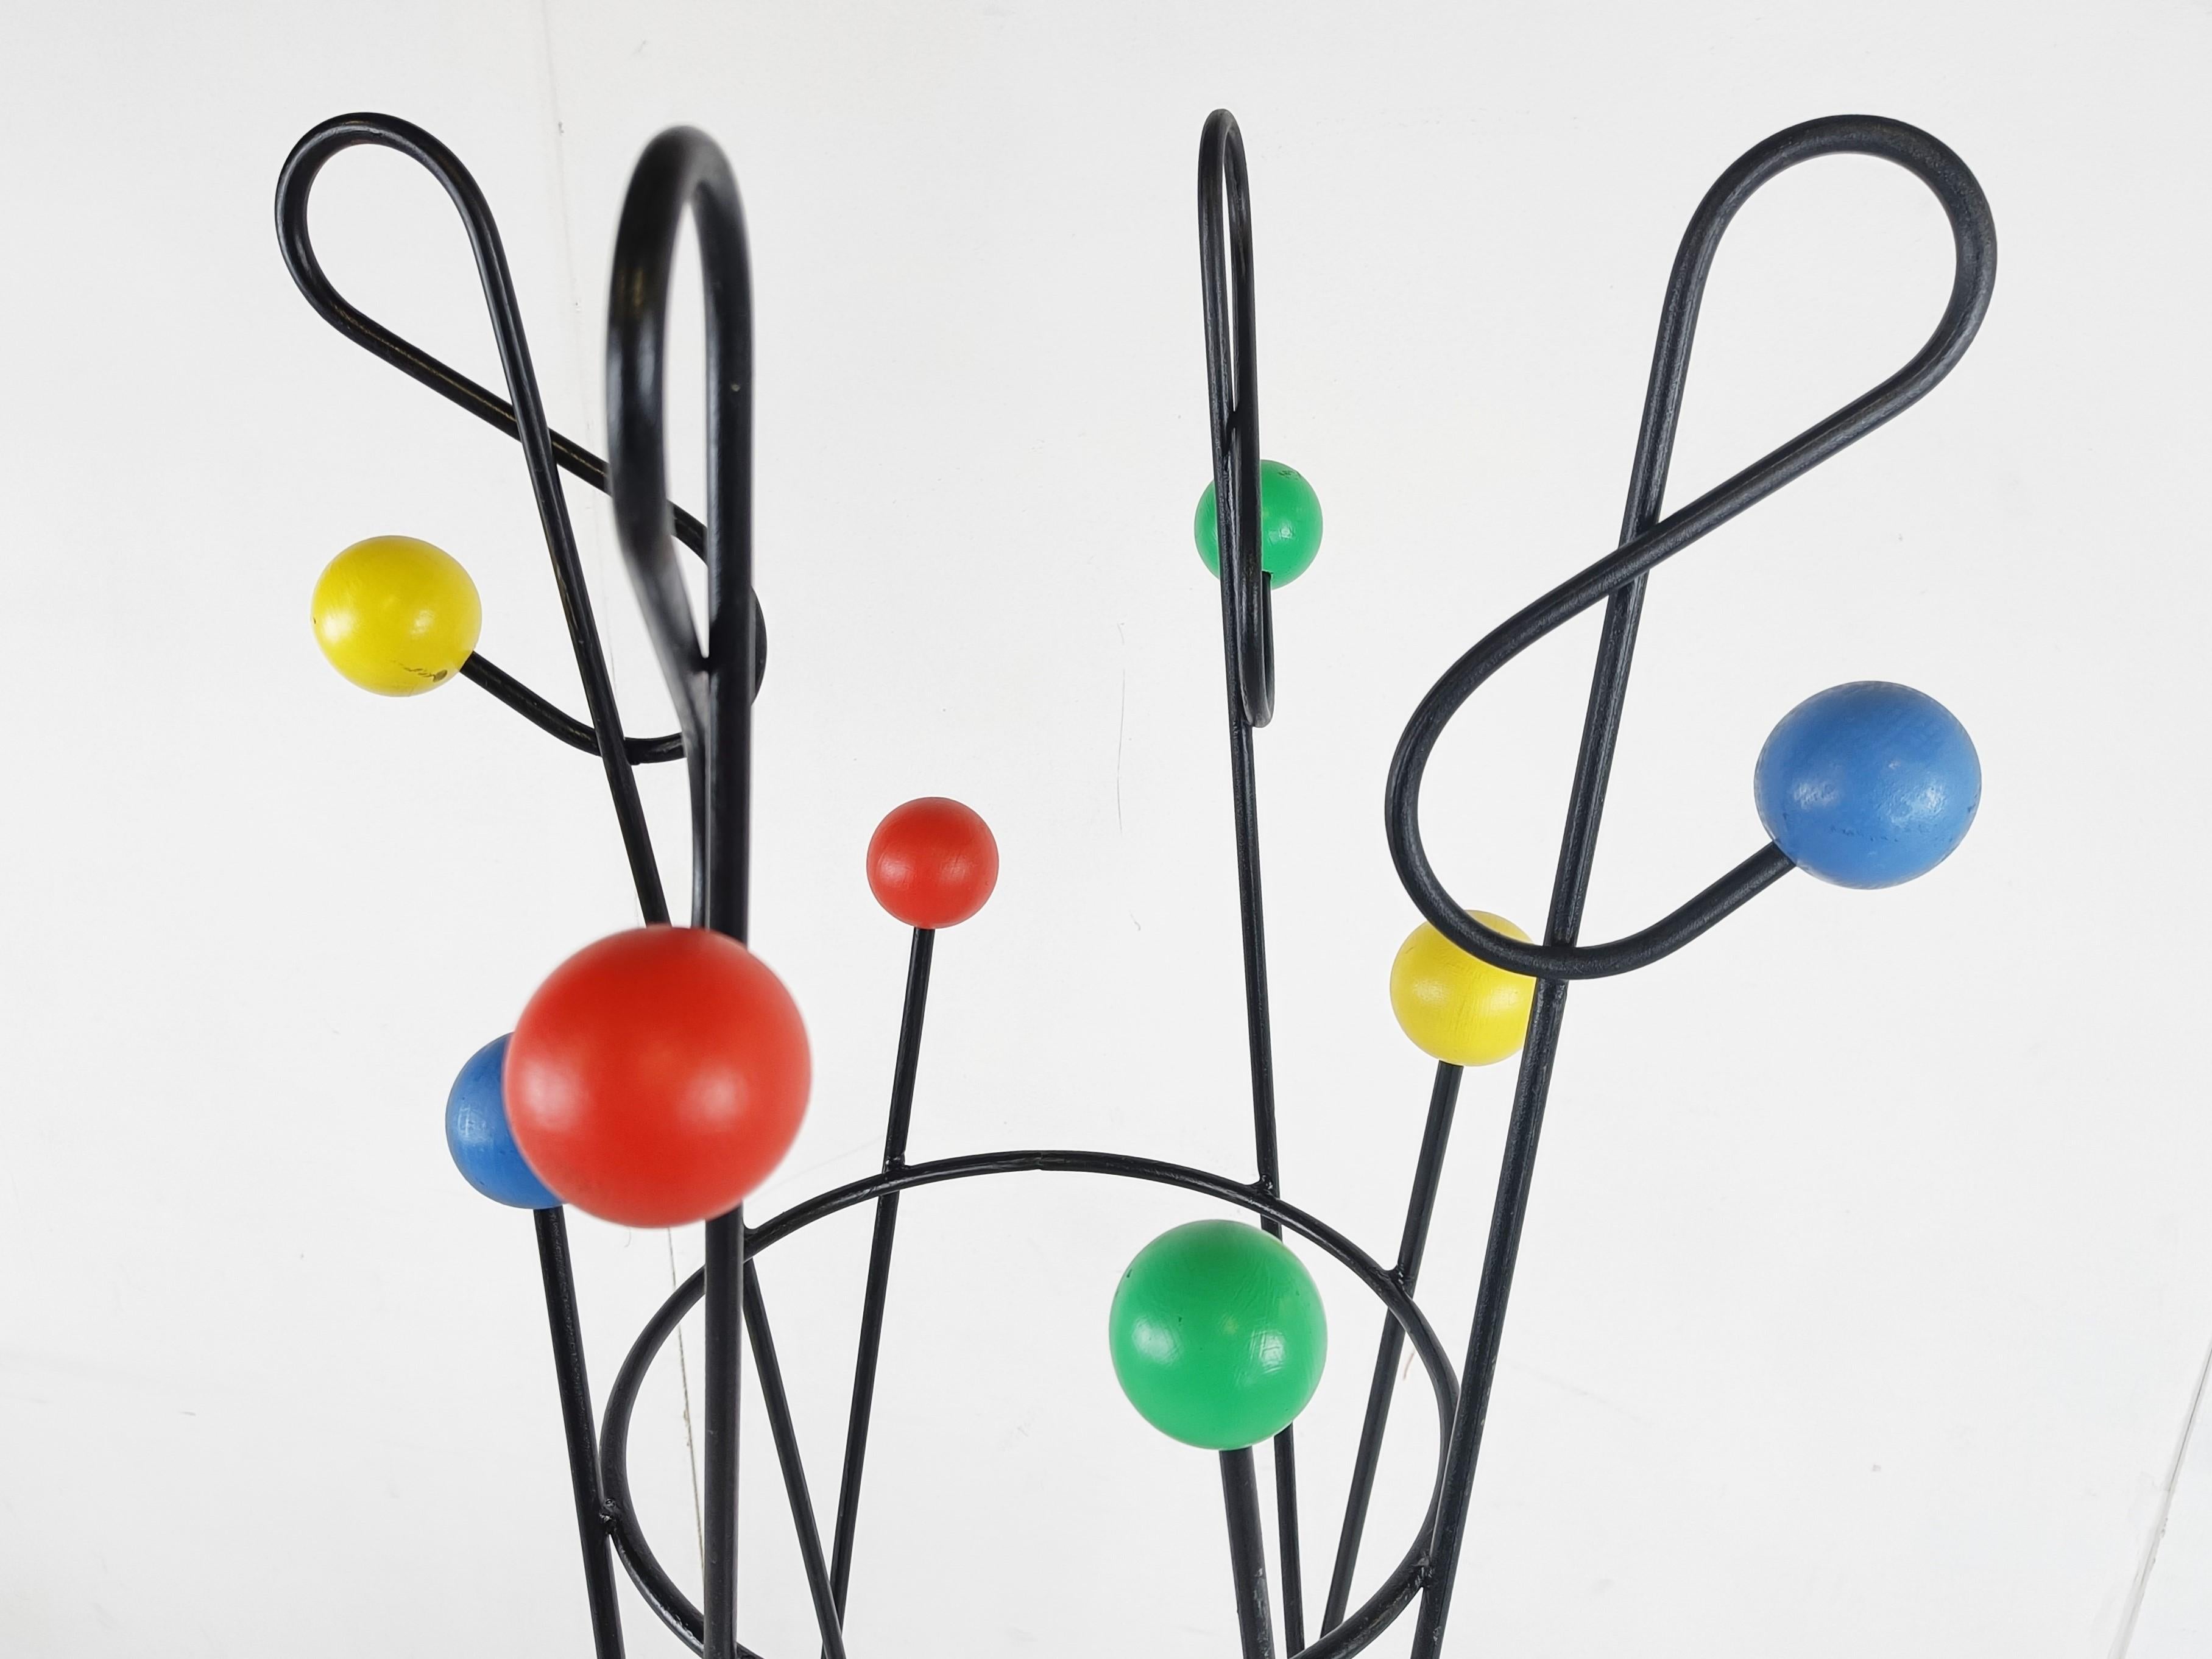 Fabulous modernist multicolour 'cle de sol' coat stand by Roger Feraud.

This remarkable coat stand has 8 coloured wooden balls.

Suitable for hats, coats, etc

It is a statement piece for your hallway or bedroom, it really gives a colourful